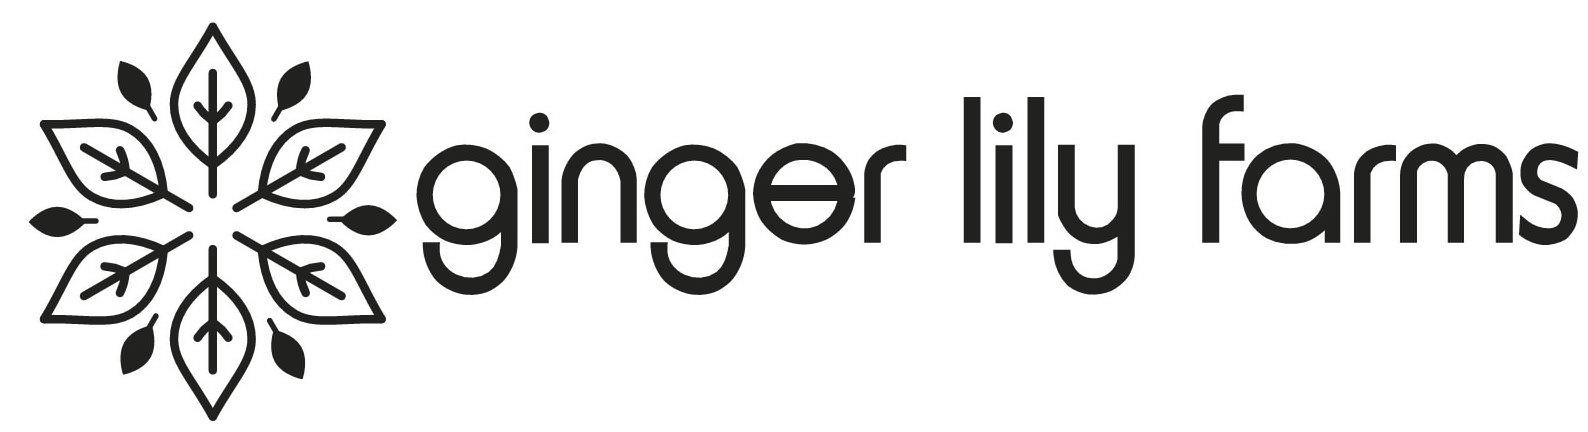 Ginger Lily Farms Tng Worldwide Inc Trademark Registration